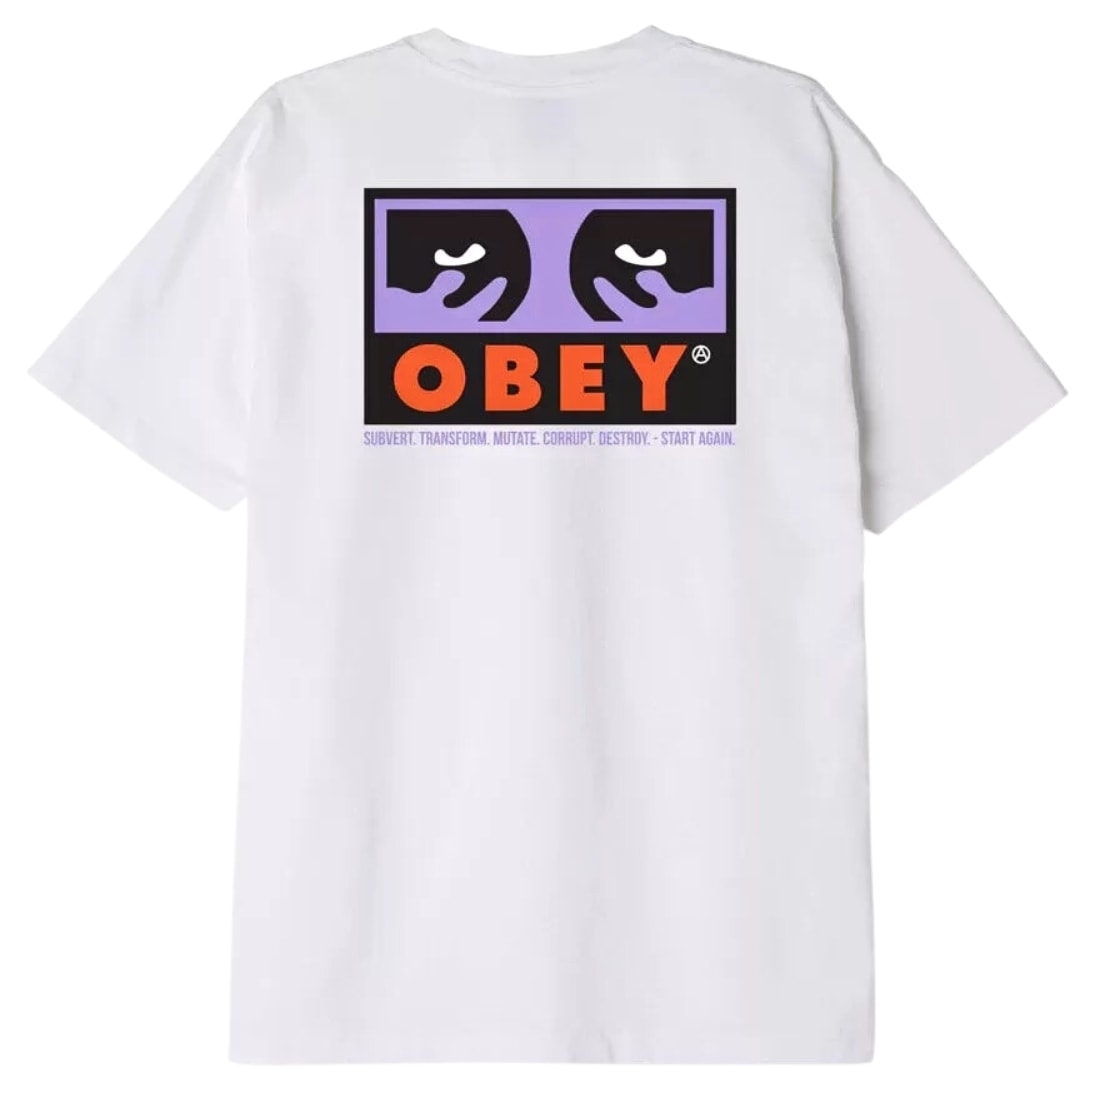 Obey Subvert T-Shirt - White - Mens Graphic T-Shirt by Obey